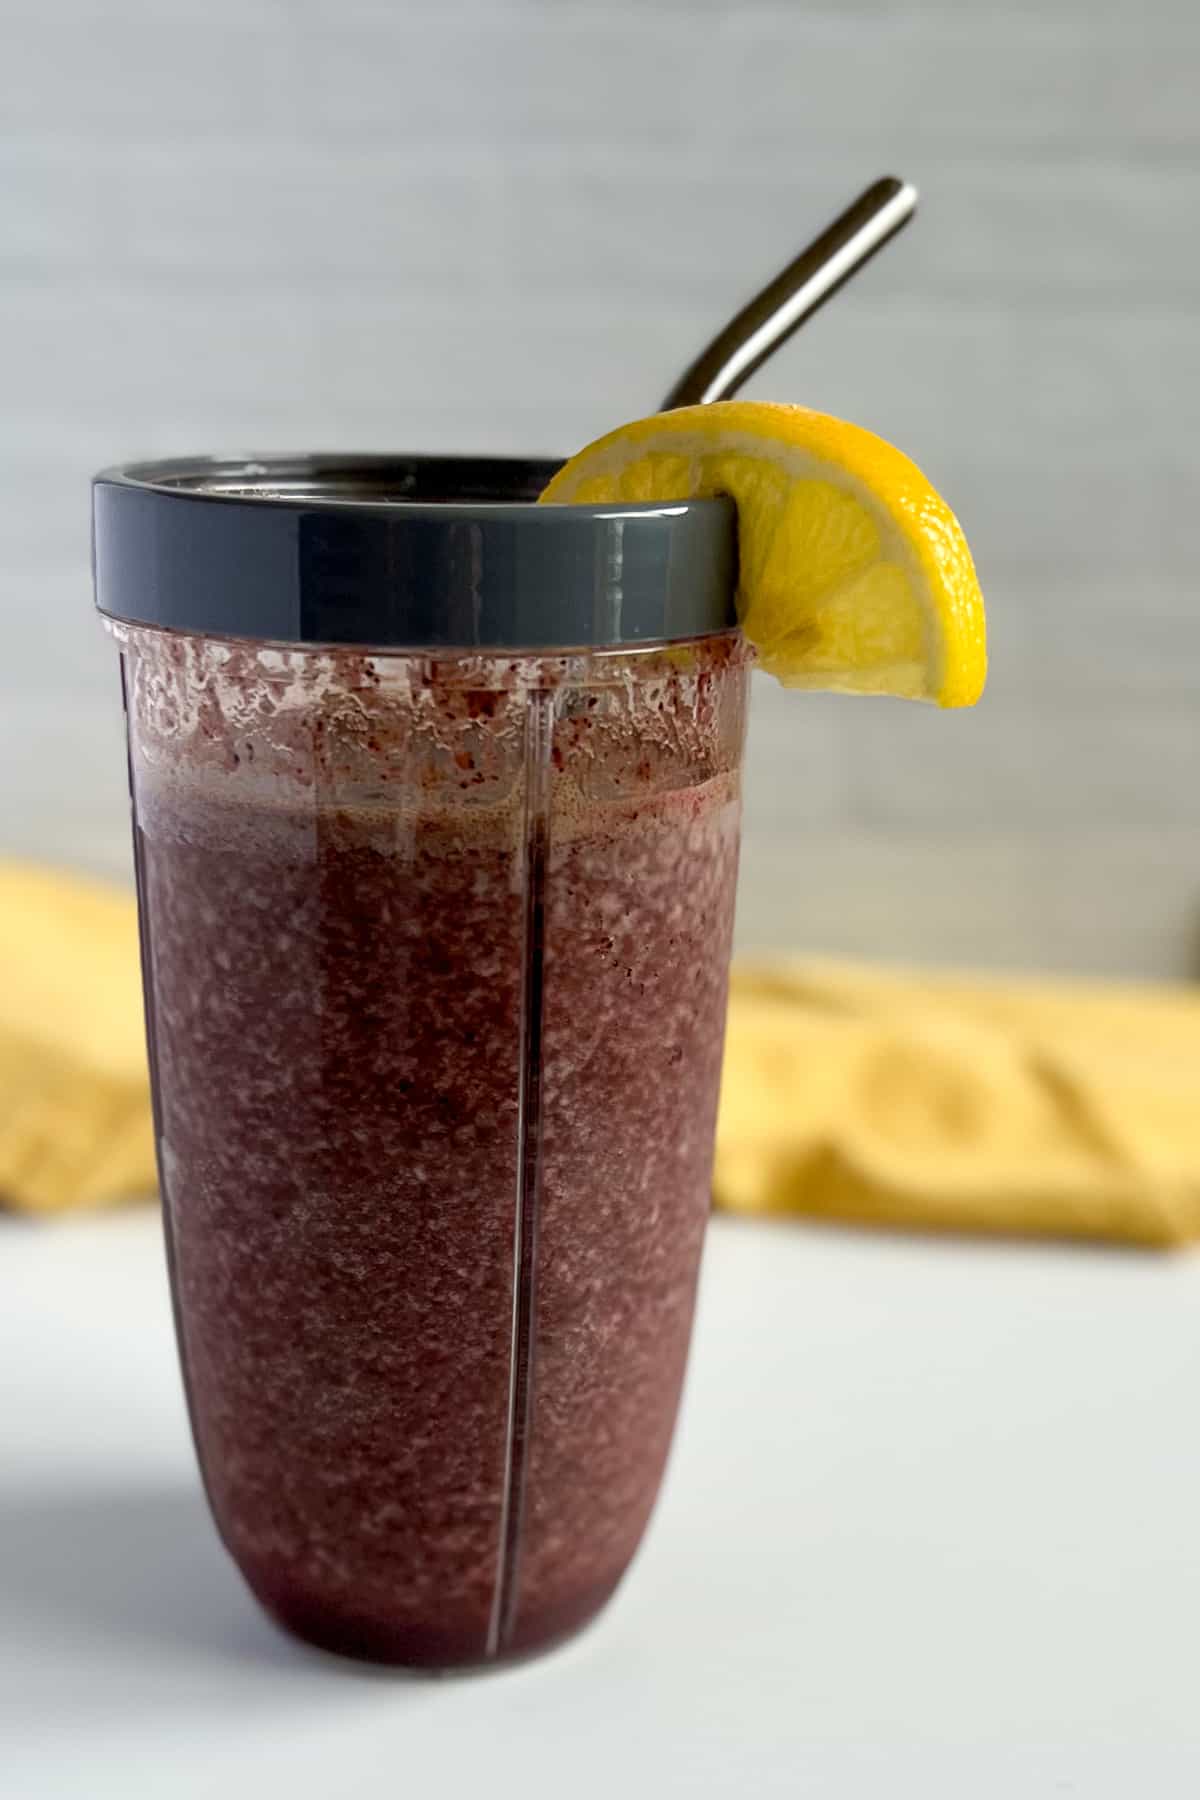 side view close up of icy deep red/purple immunity smoothie in a cup with gray rim and lemon wedge on the rim; metal straw sticking out